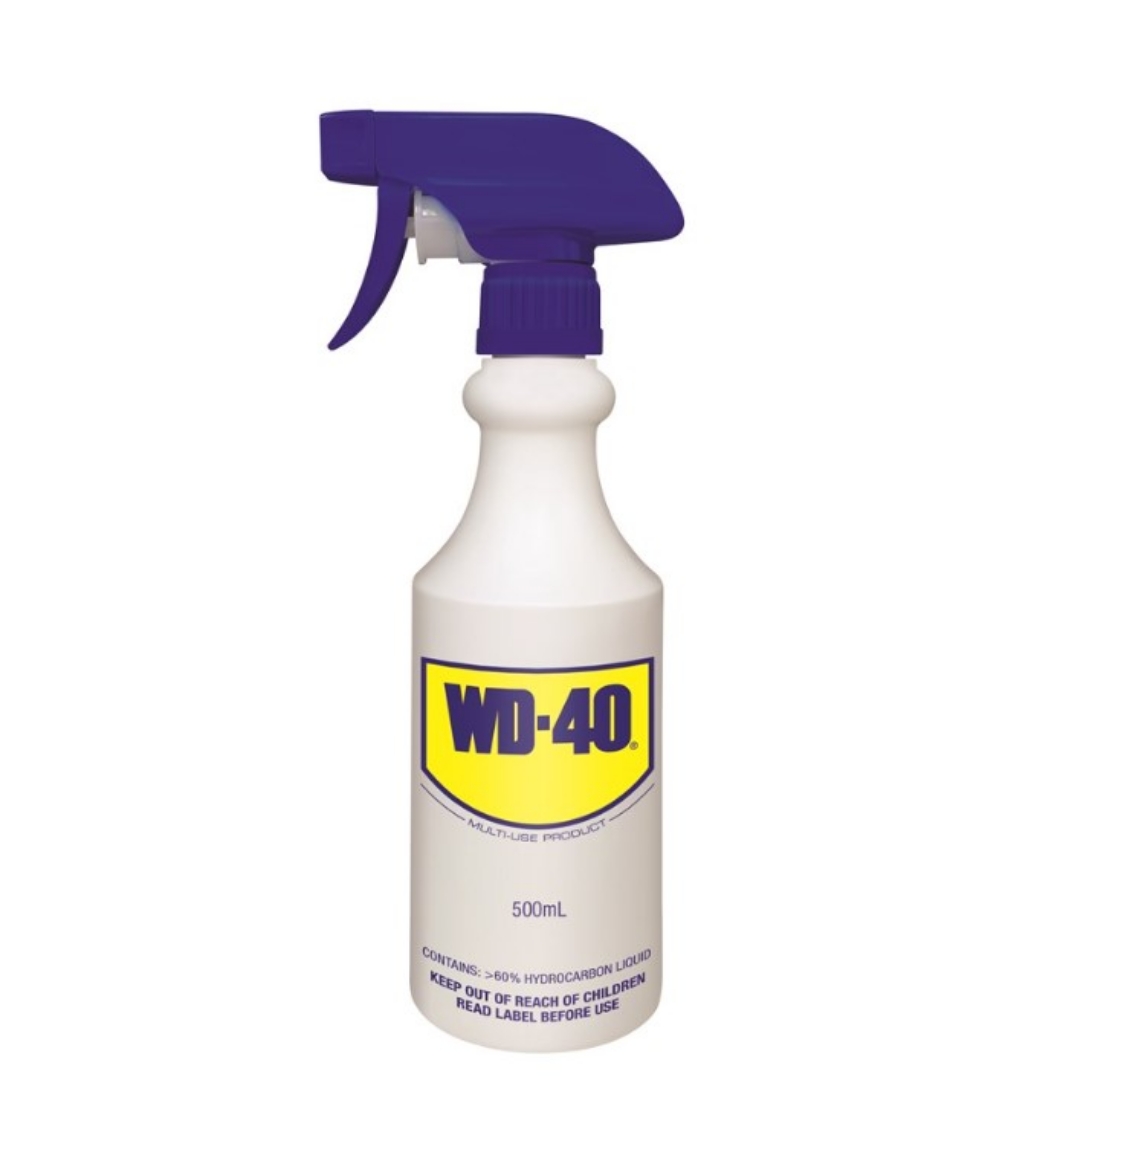 Picture of WD-40 Multi-Use Product Spray Applicator 500mL